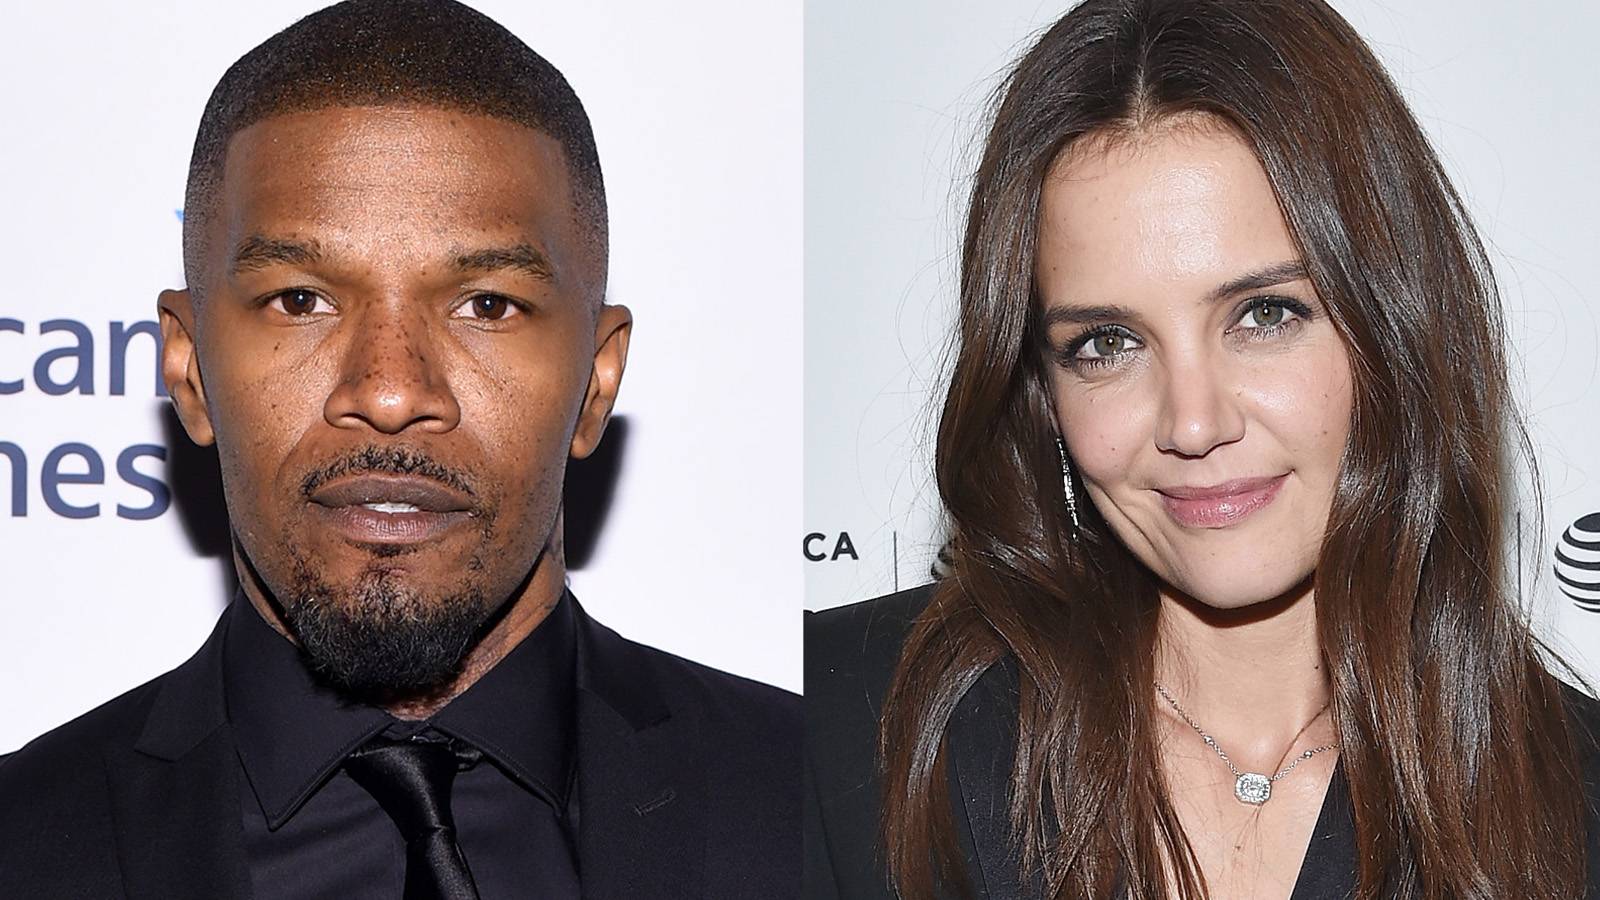 Are These Two Expecting a Baby? - Rumors are flying all over the place that Katie Holmes and Jamie Foxx may be four months pregnant. However, the couple remains tight-lipped. Are they even Facebook official yet? &nbsp;(Photos from left: Dimitrios Kambouris/Getty Images for EIF, Mike Coppola/Getty Images for 2016 Tribeca Film Festival)